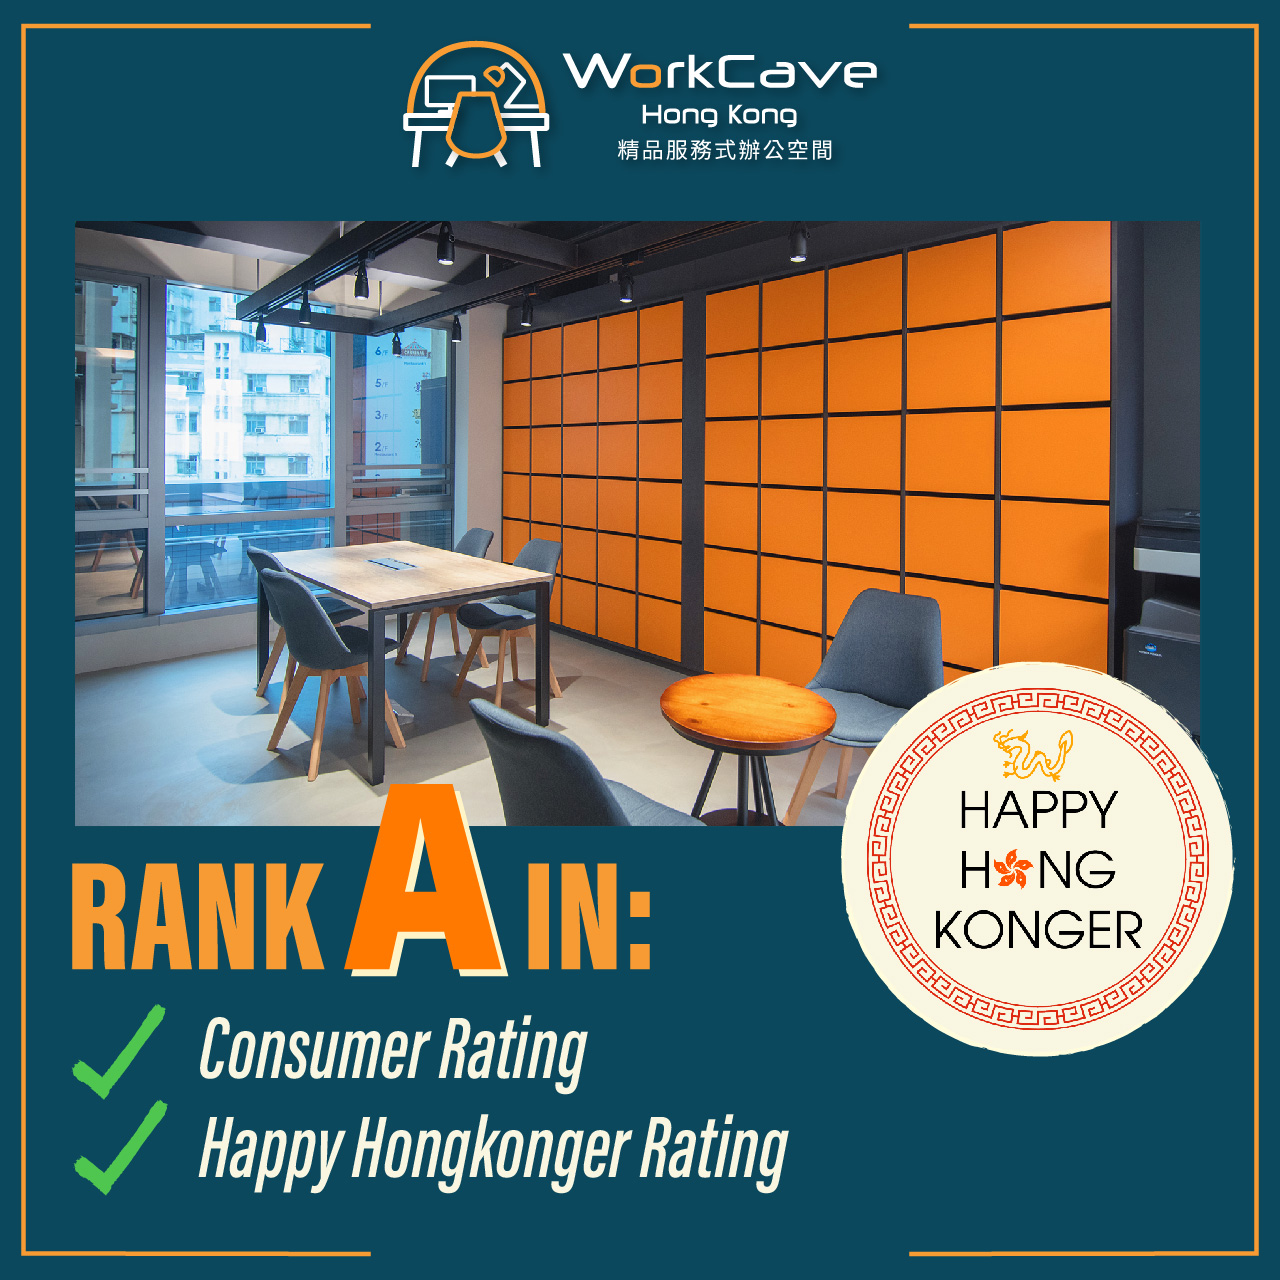 L3 Hot Desk orange locker area and Happy Hongkonger badge, with words "rank A in Consumer Rating and Happy Hongkonger Rating"